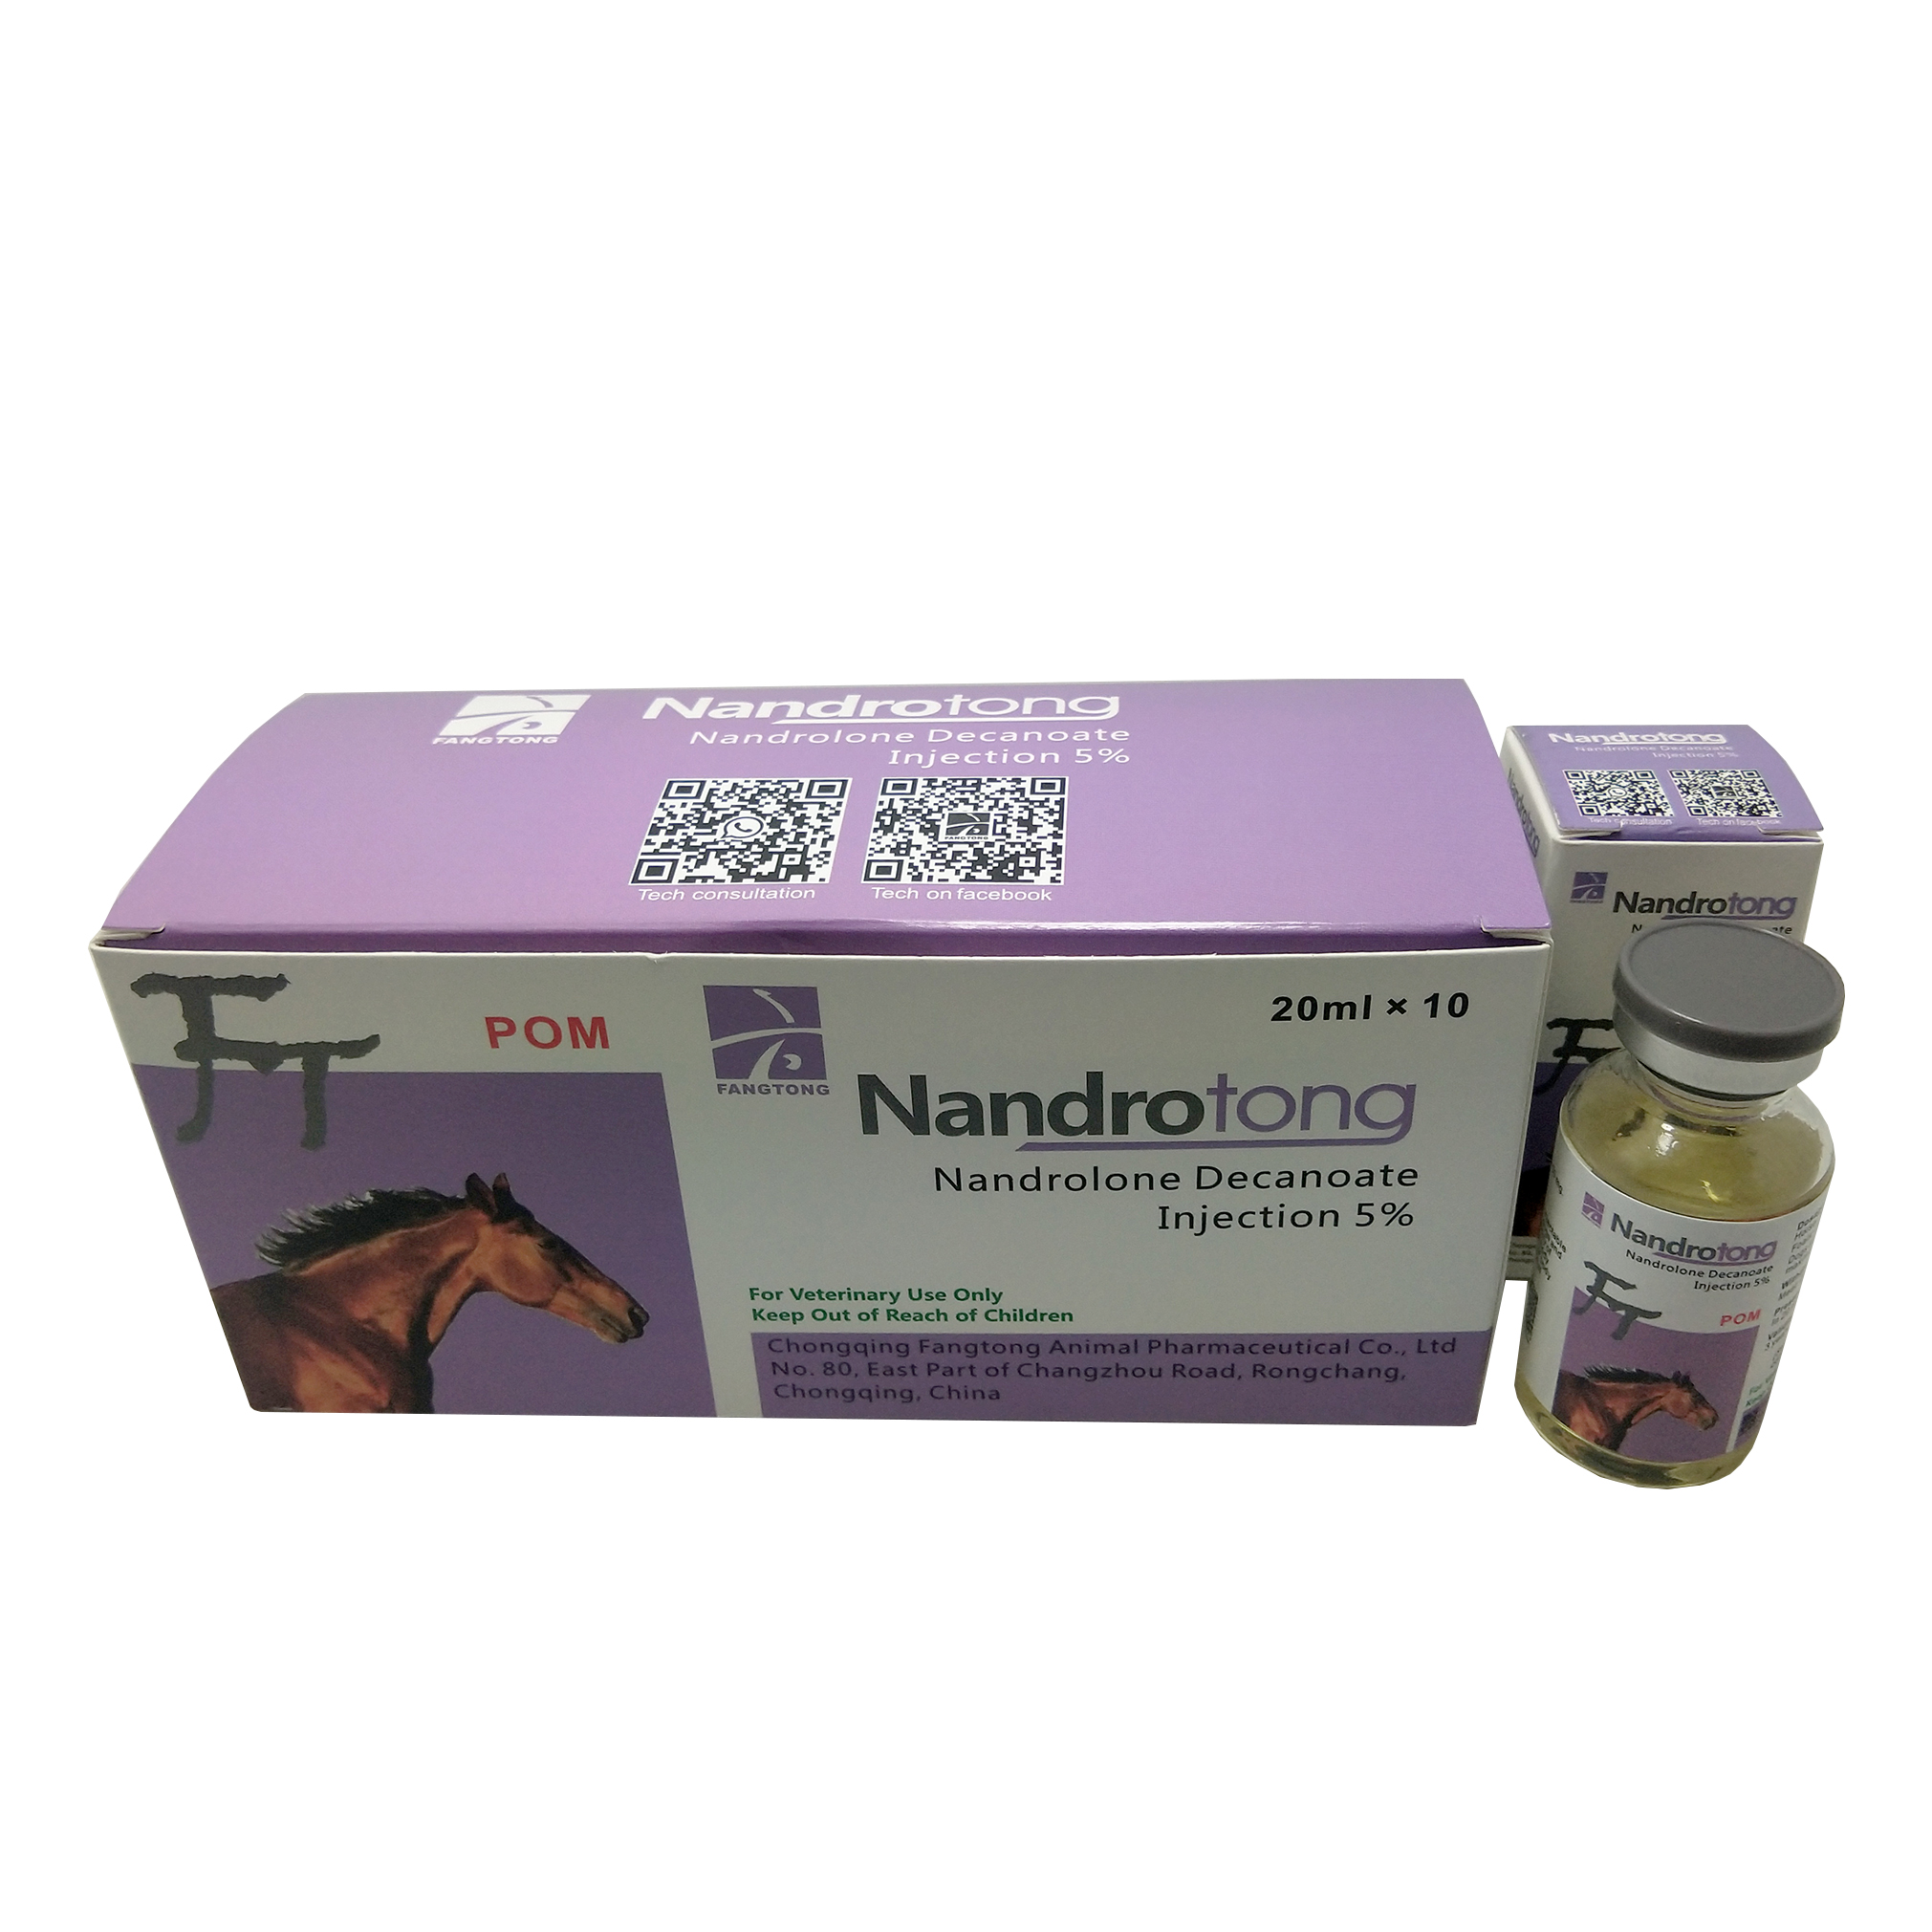 Nandrolone Decanoate Injection 5% Featured Image